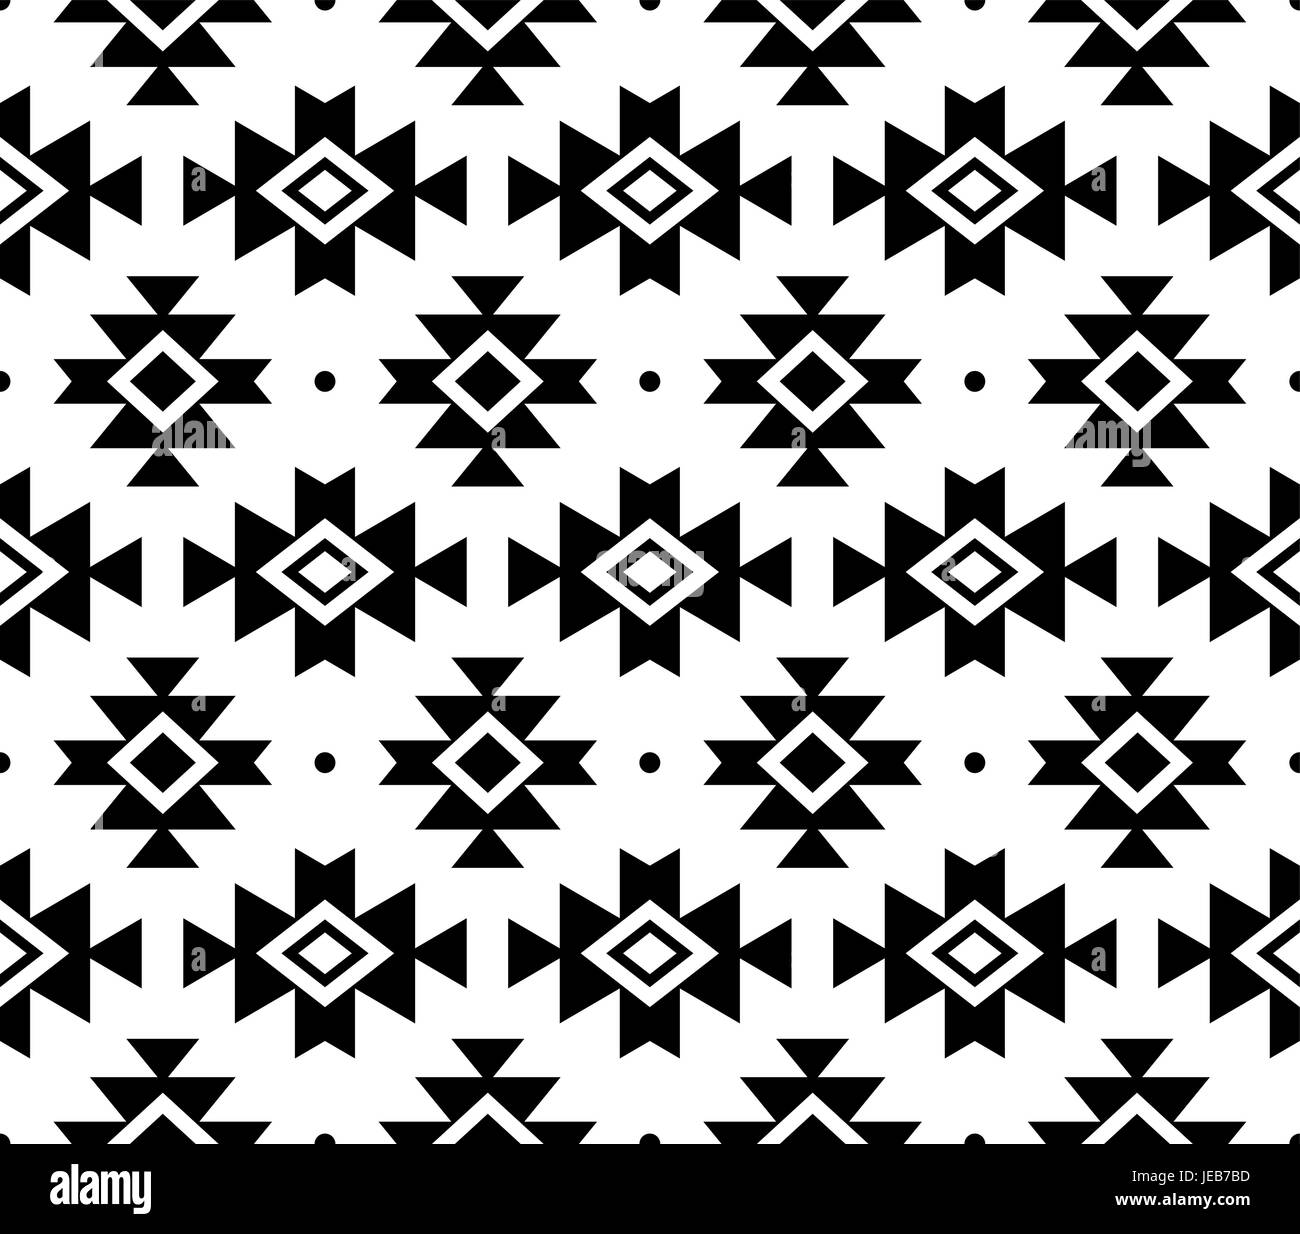 pretty tribal patterns backgrounds